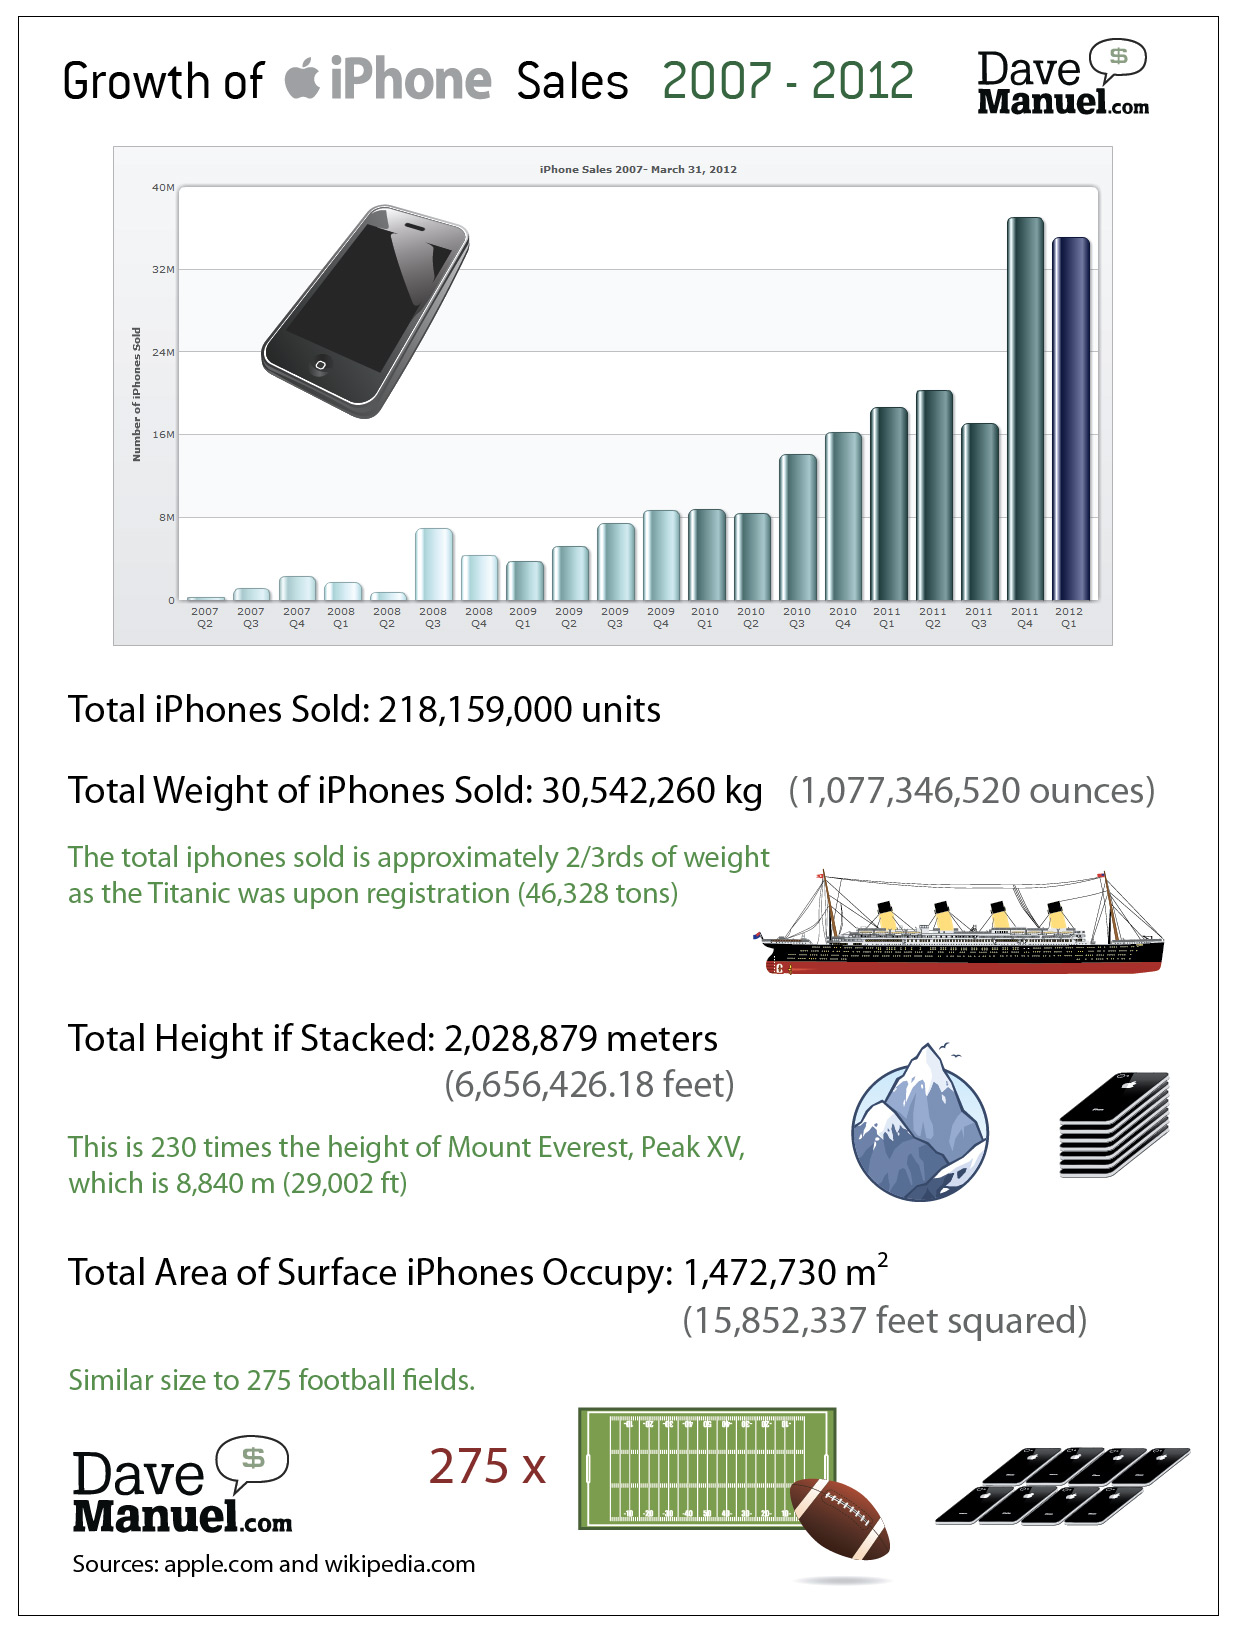 Growth of Apple iPhone Sales - World Wide - 2007 - 2012 - Illlustration - Infographic